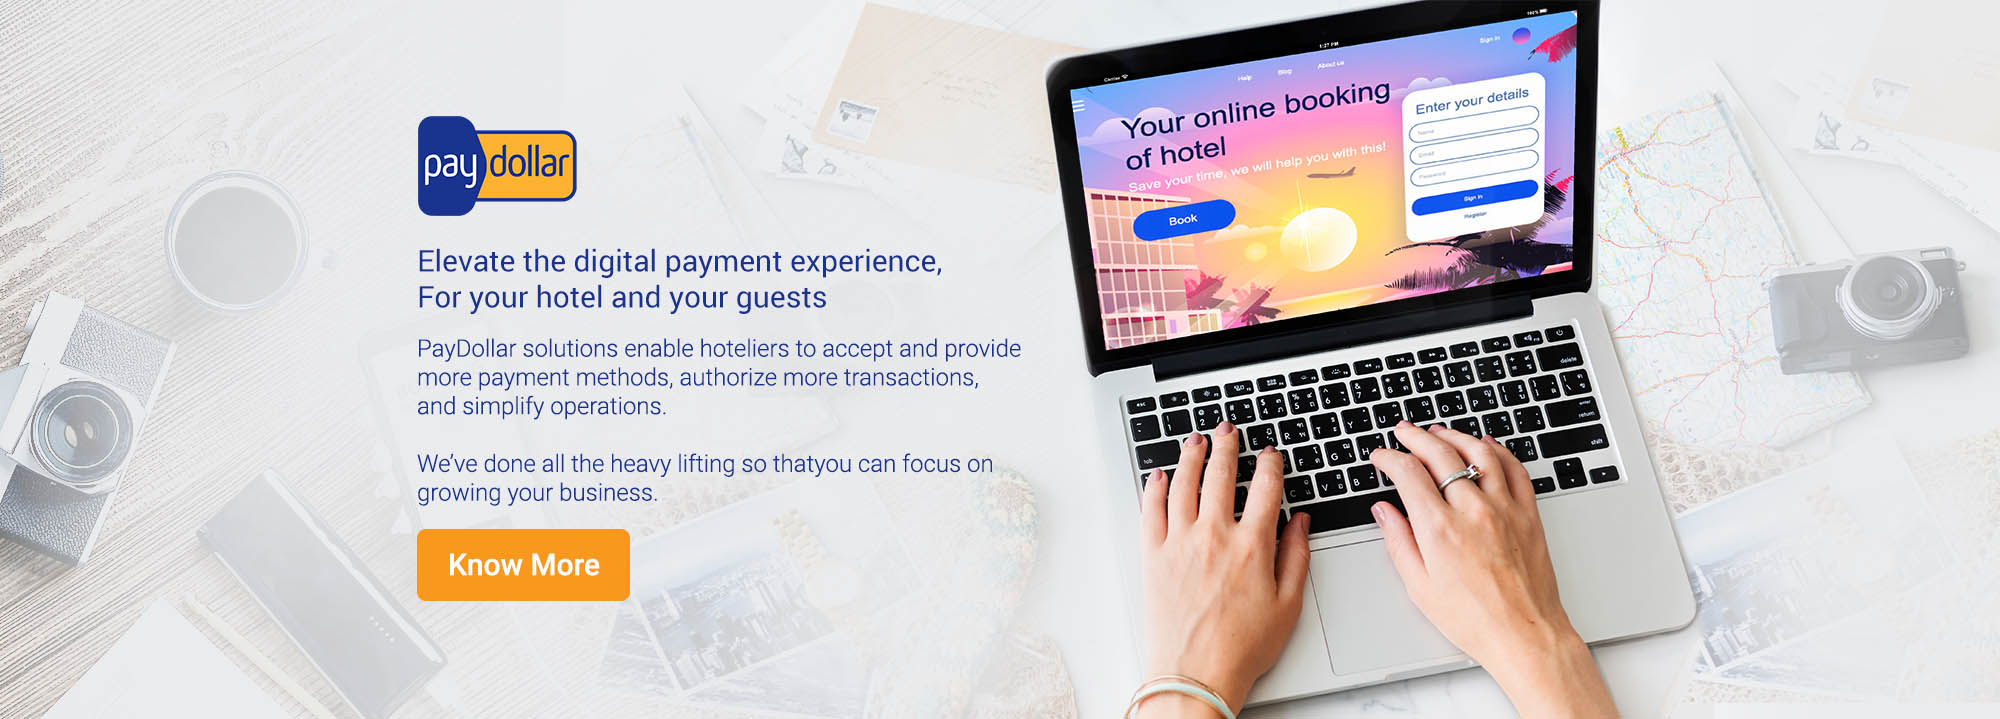 Elevate the digital payment experience, For your hotel and your guests